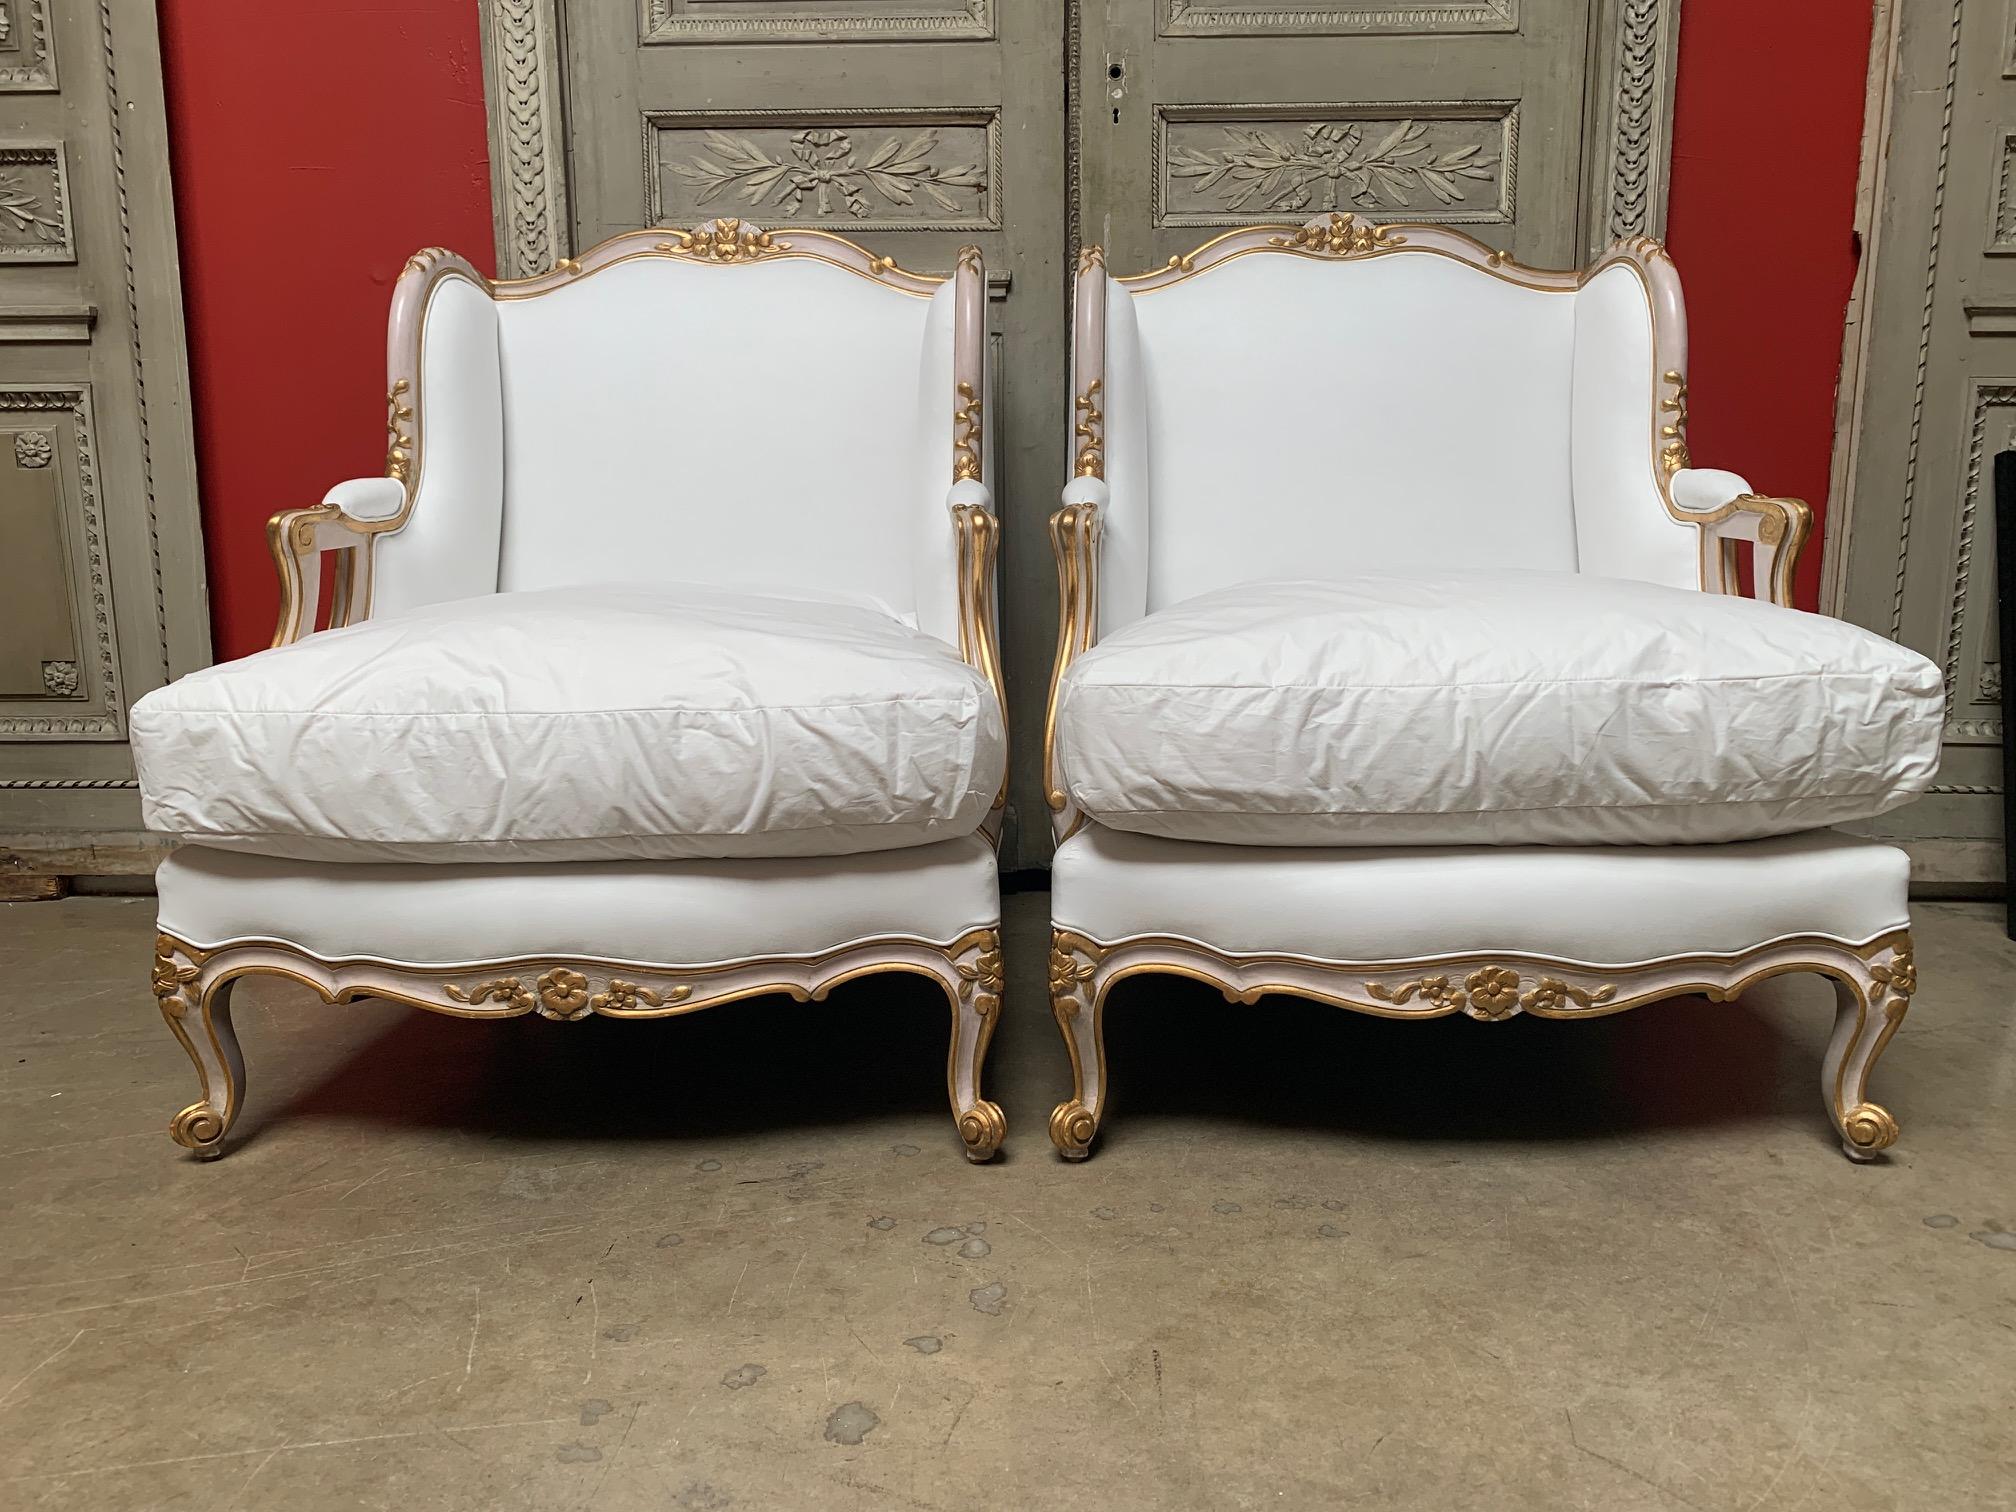 A pair of carved wood French Louis XV style armchairs, bergeres with a painted pink and gilded finish.
These large chairs are hand carved with wings and raised floral carving. They are upholstered in muslin and have a large down and feather cushion.